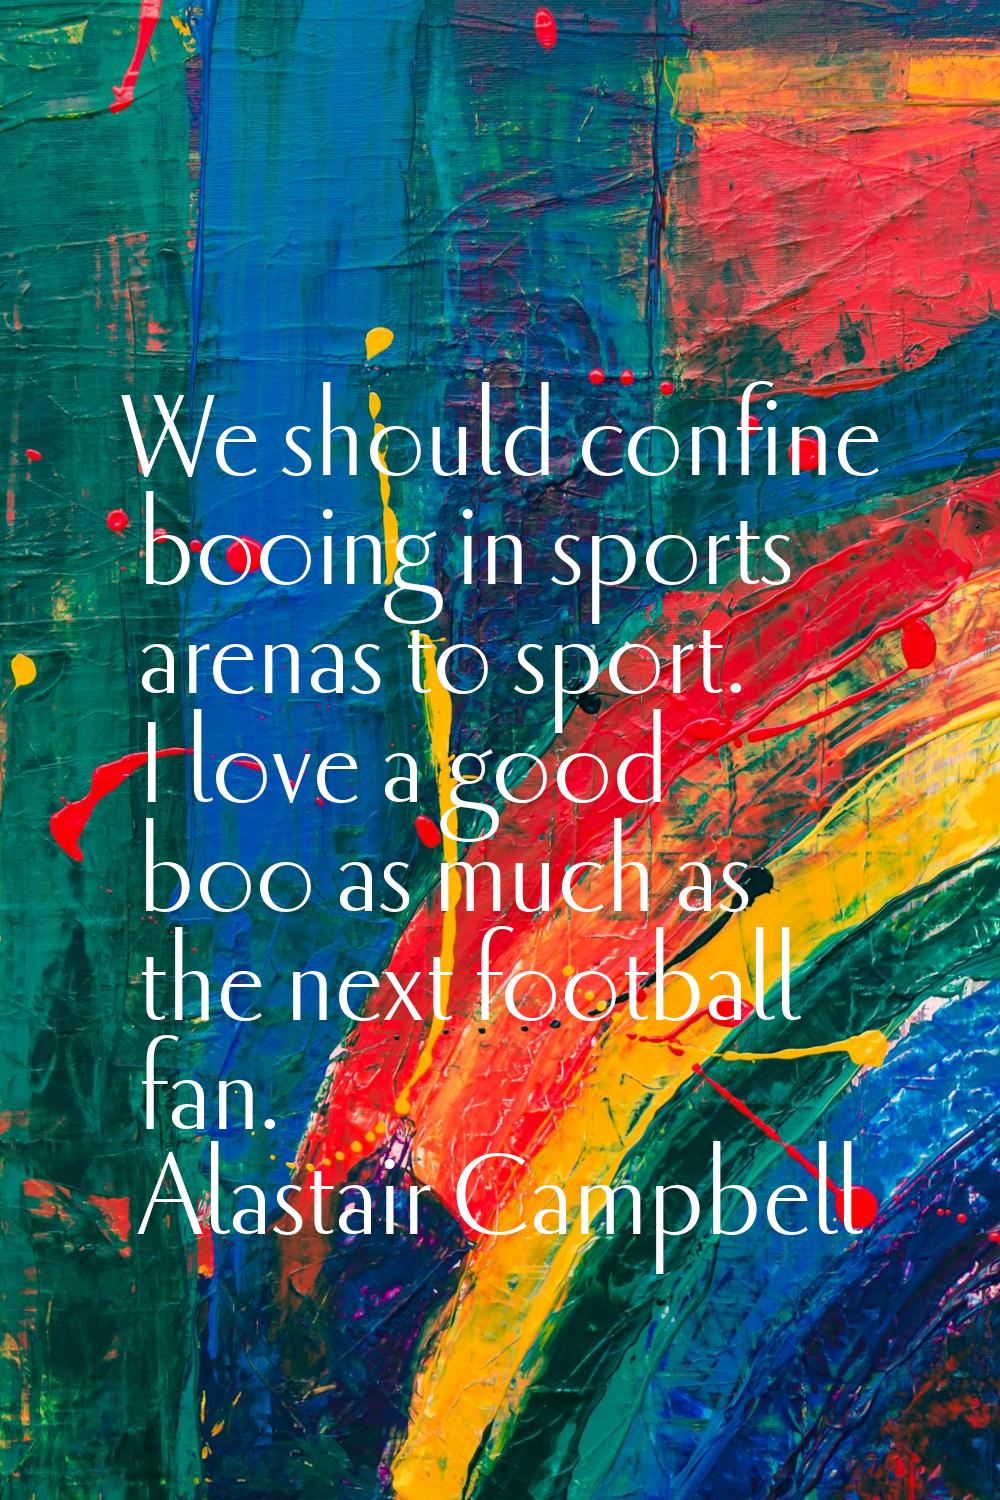 We should confine booing in sports arenas to sport. I love a good boo as much as the next football 